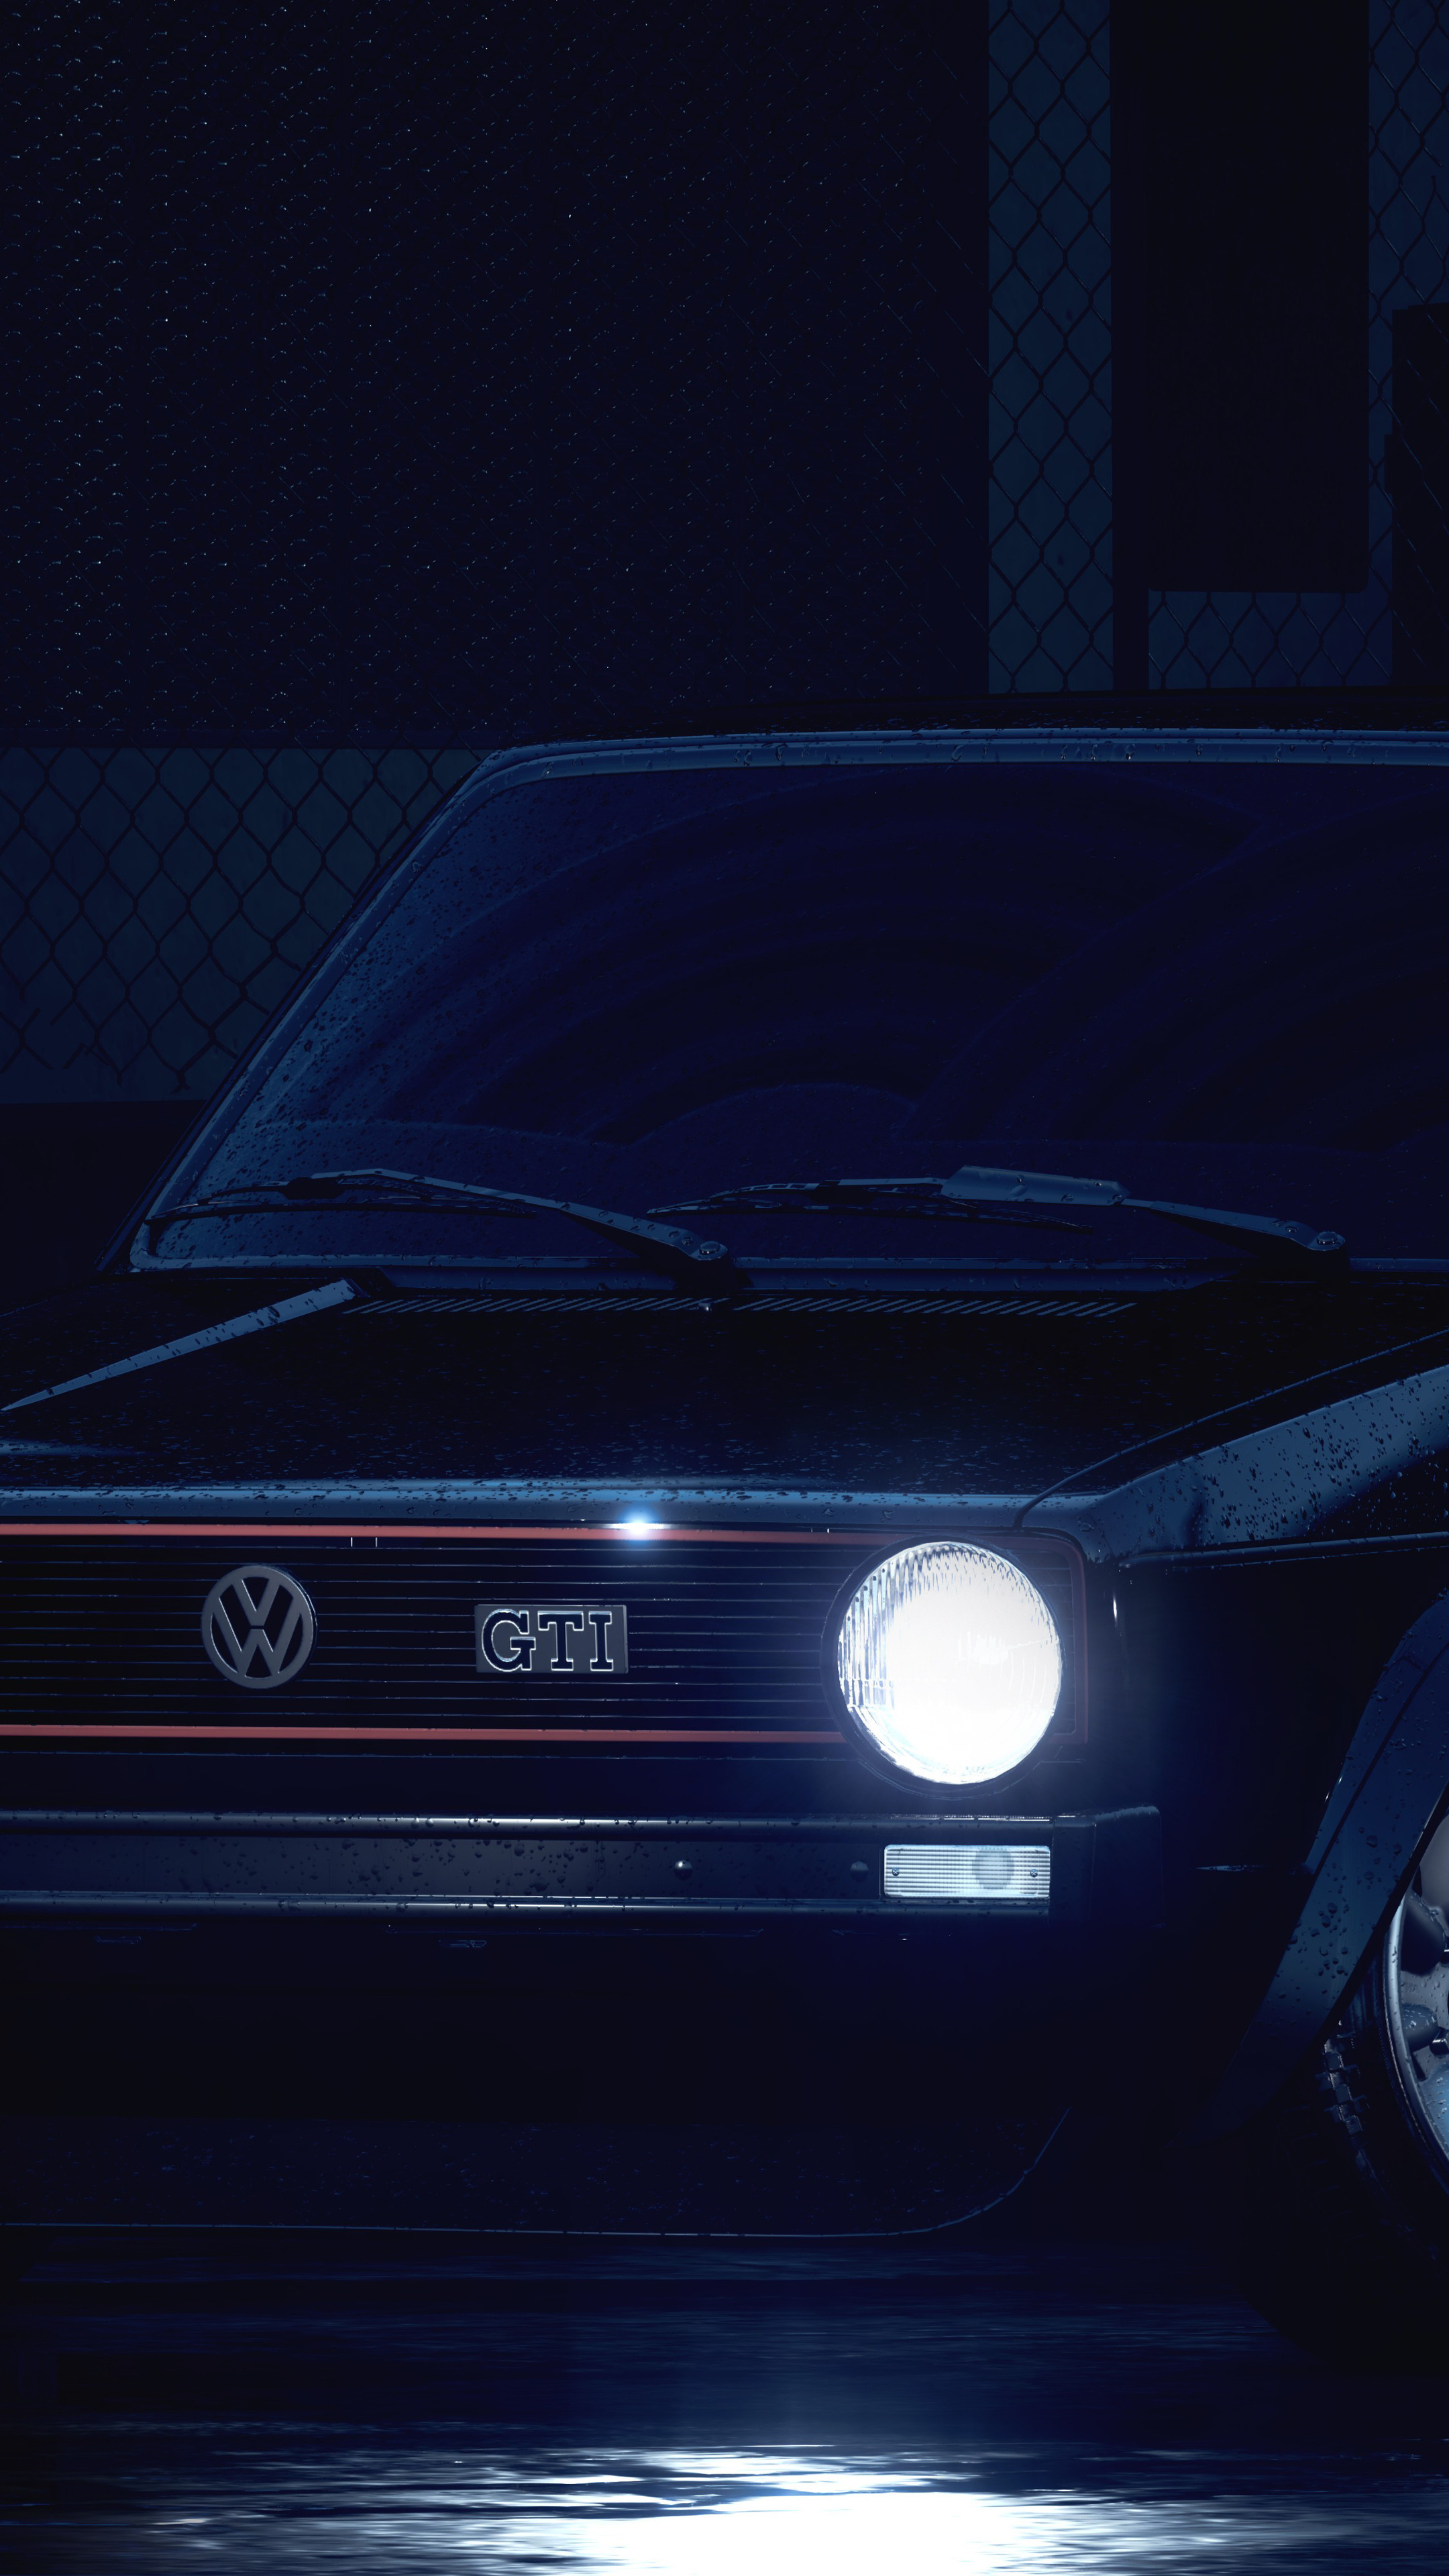 Golf GTI: Volkswagen, Mk1, A small family car produced by Volkswagen since 1975. 2160x3840 4K Wallpaper.